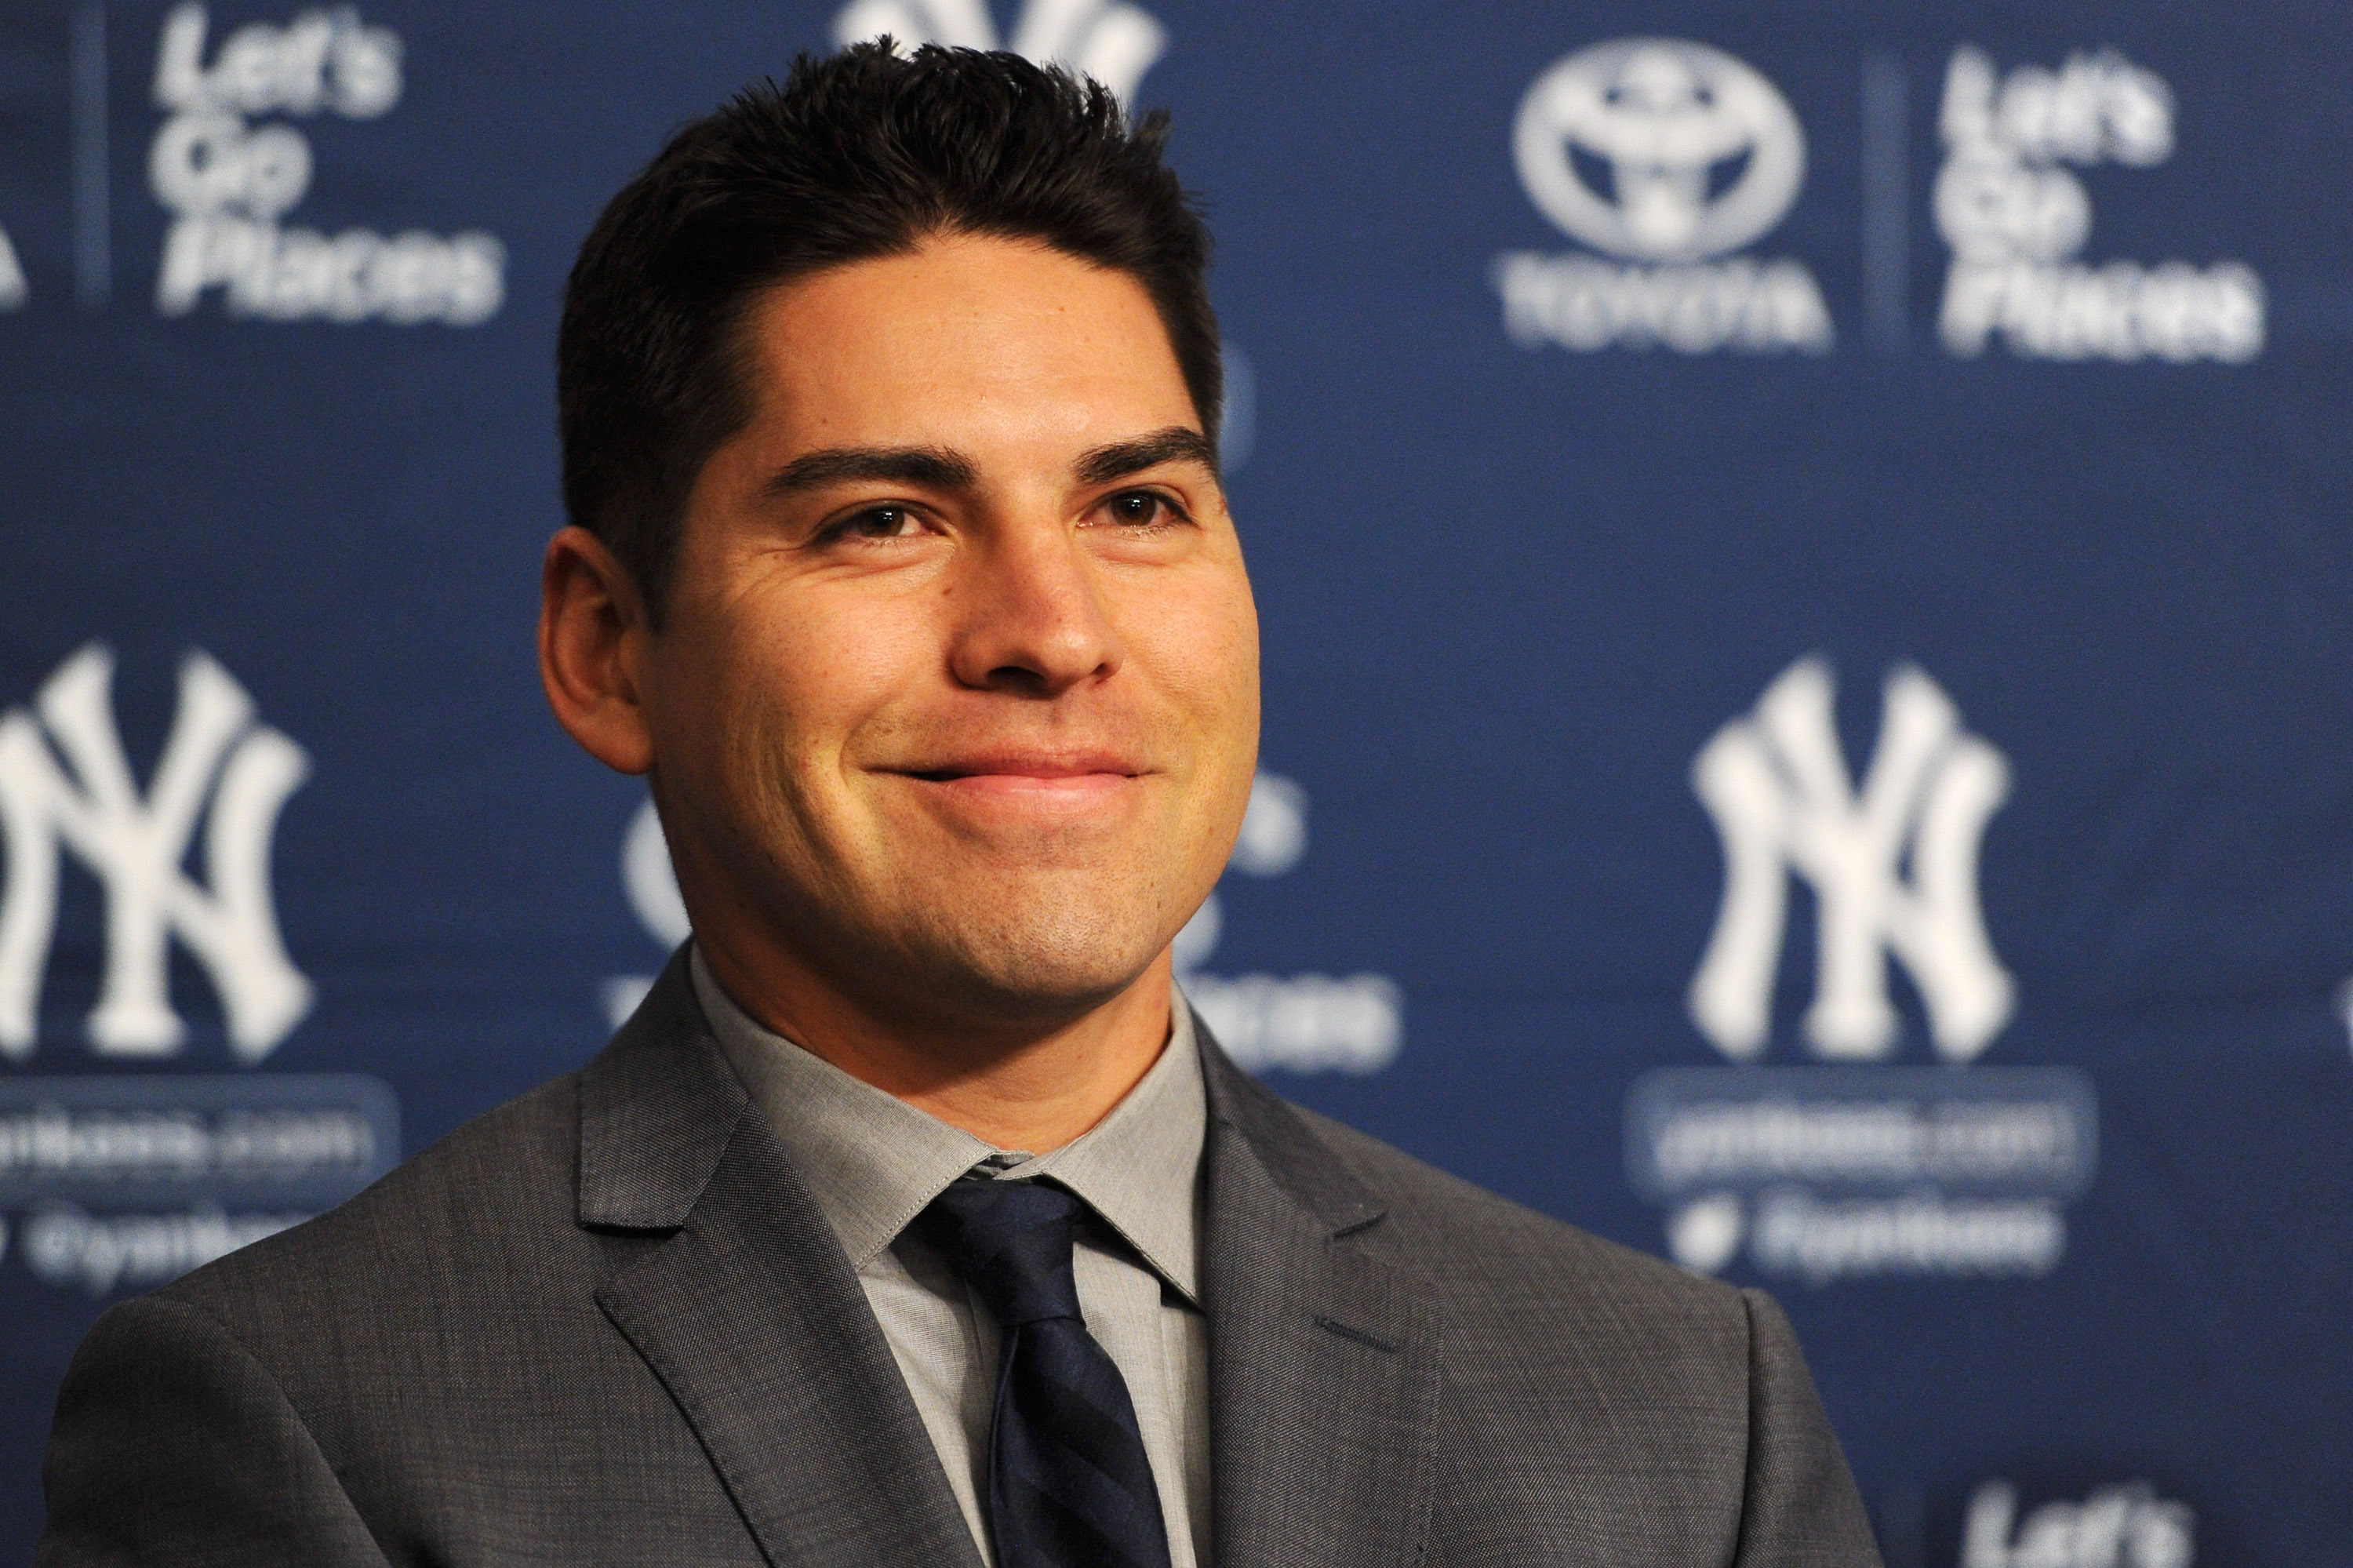 Jacoby Ellsbury quietly became the Yankees' forgotten man - The Boston Globe